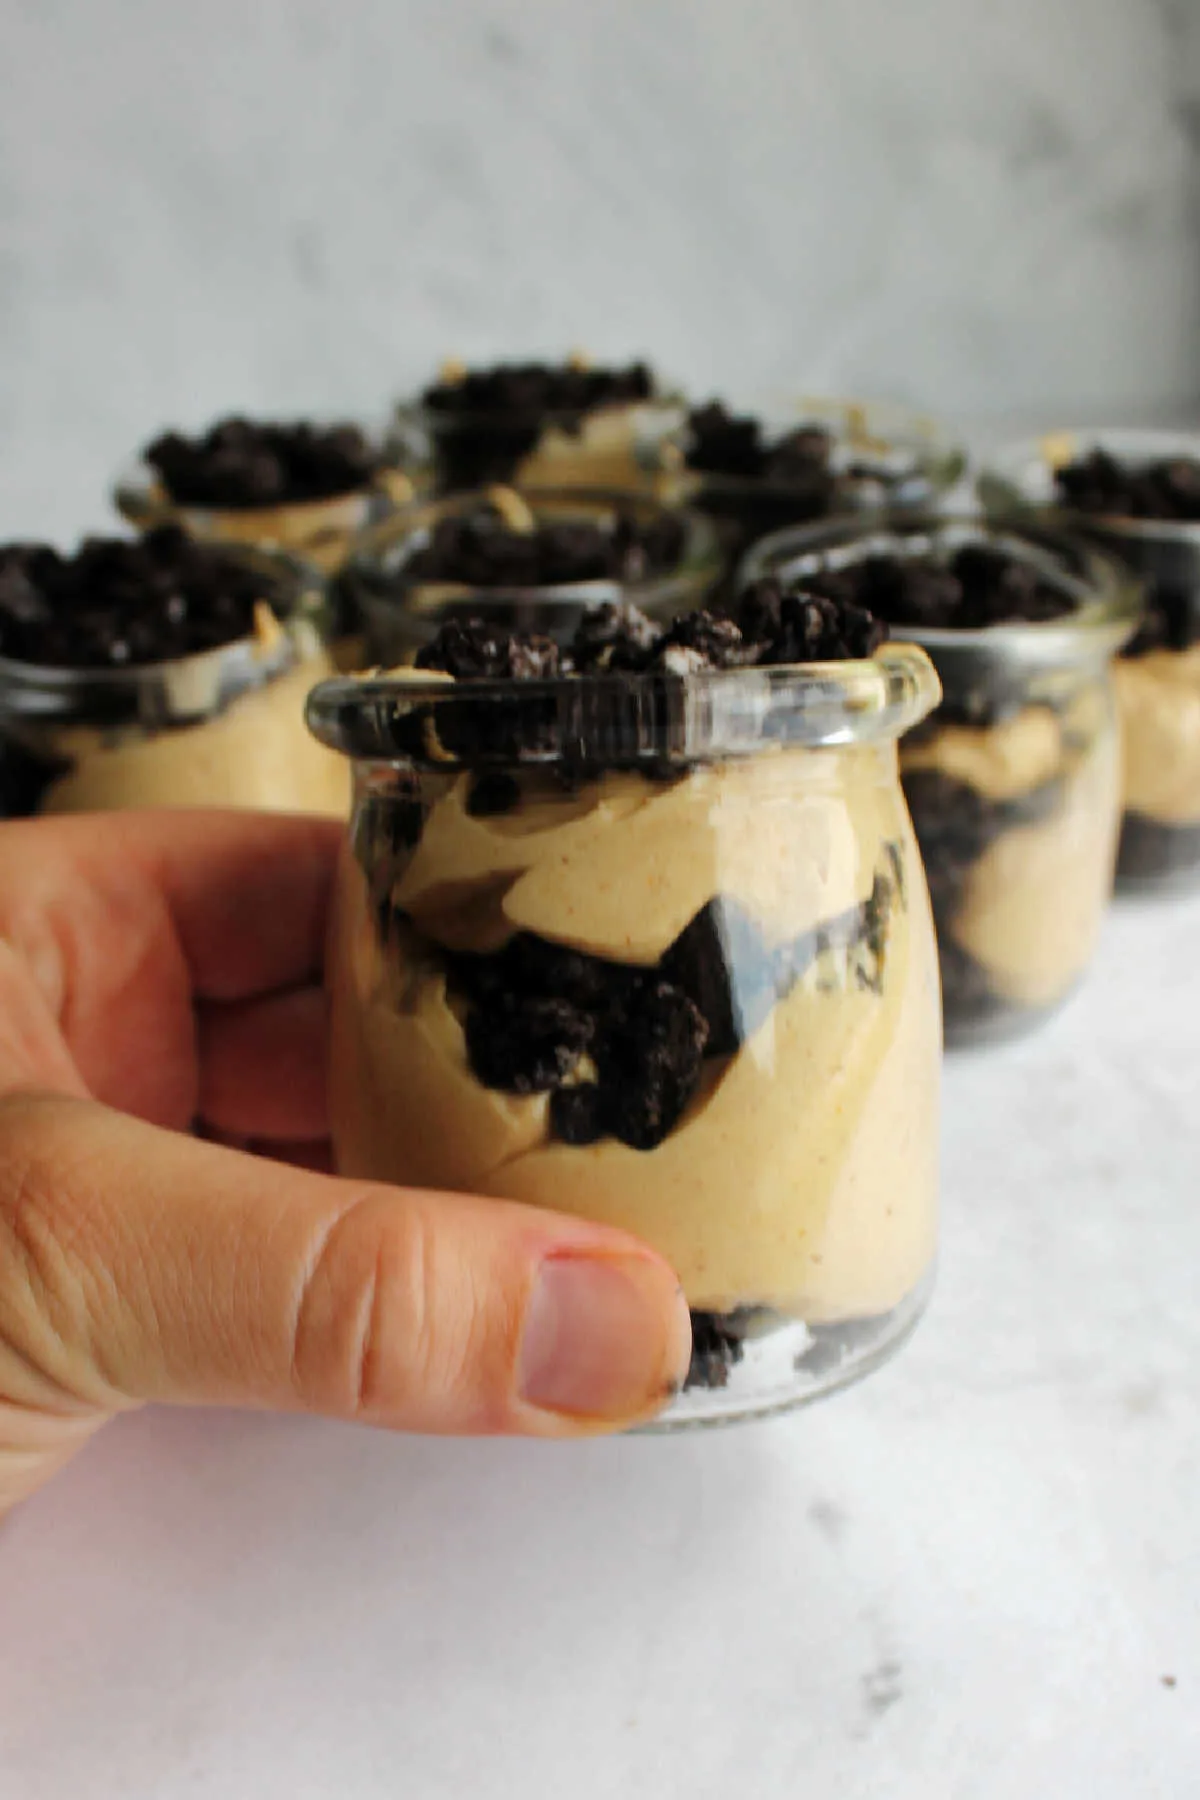 Hand holding jar of peanut butter Oreo dirt pudding ready to eat.